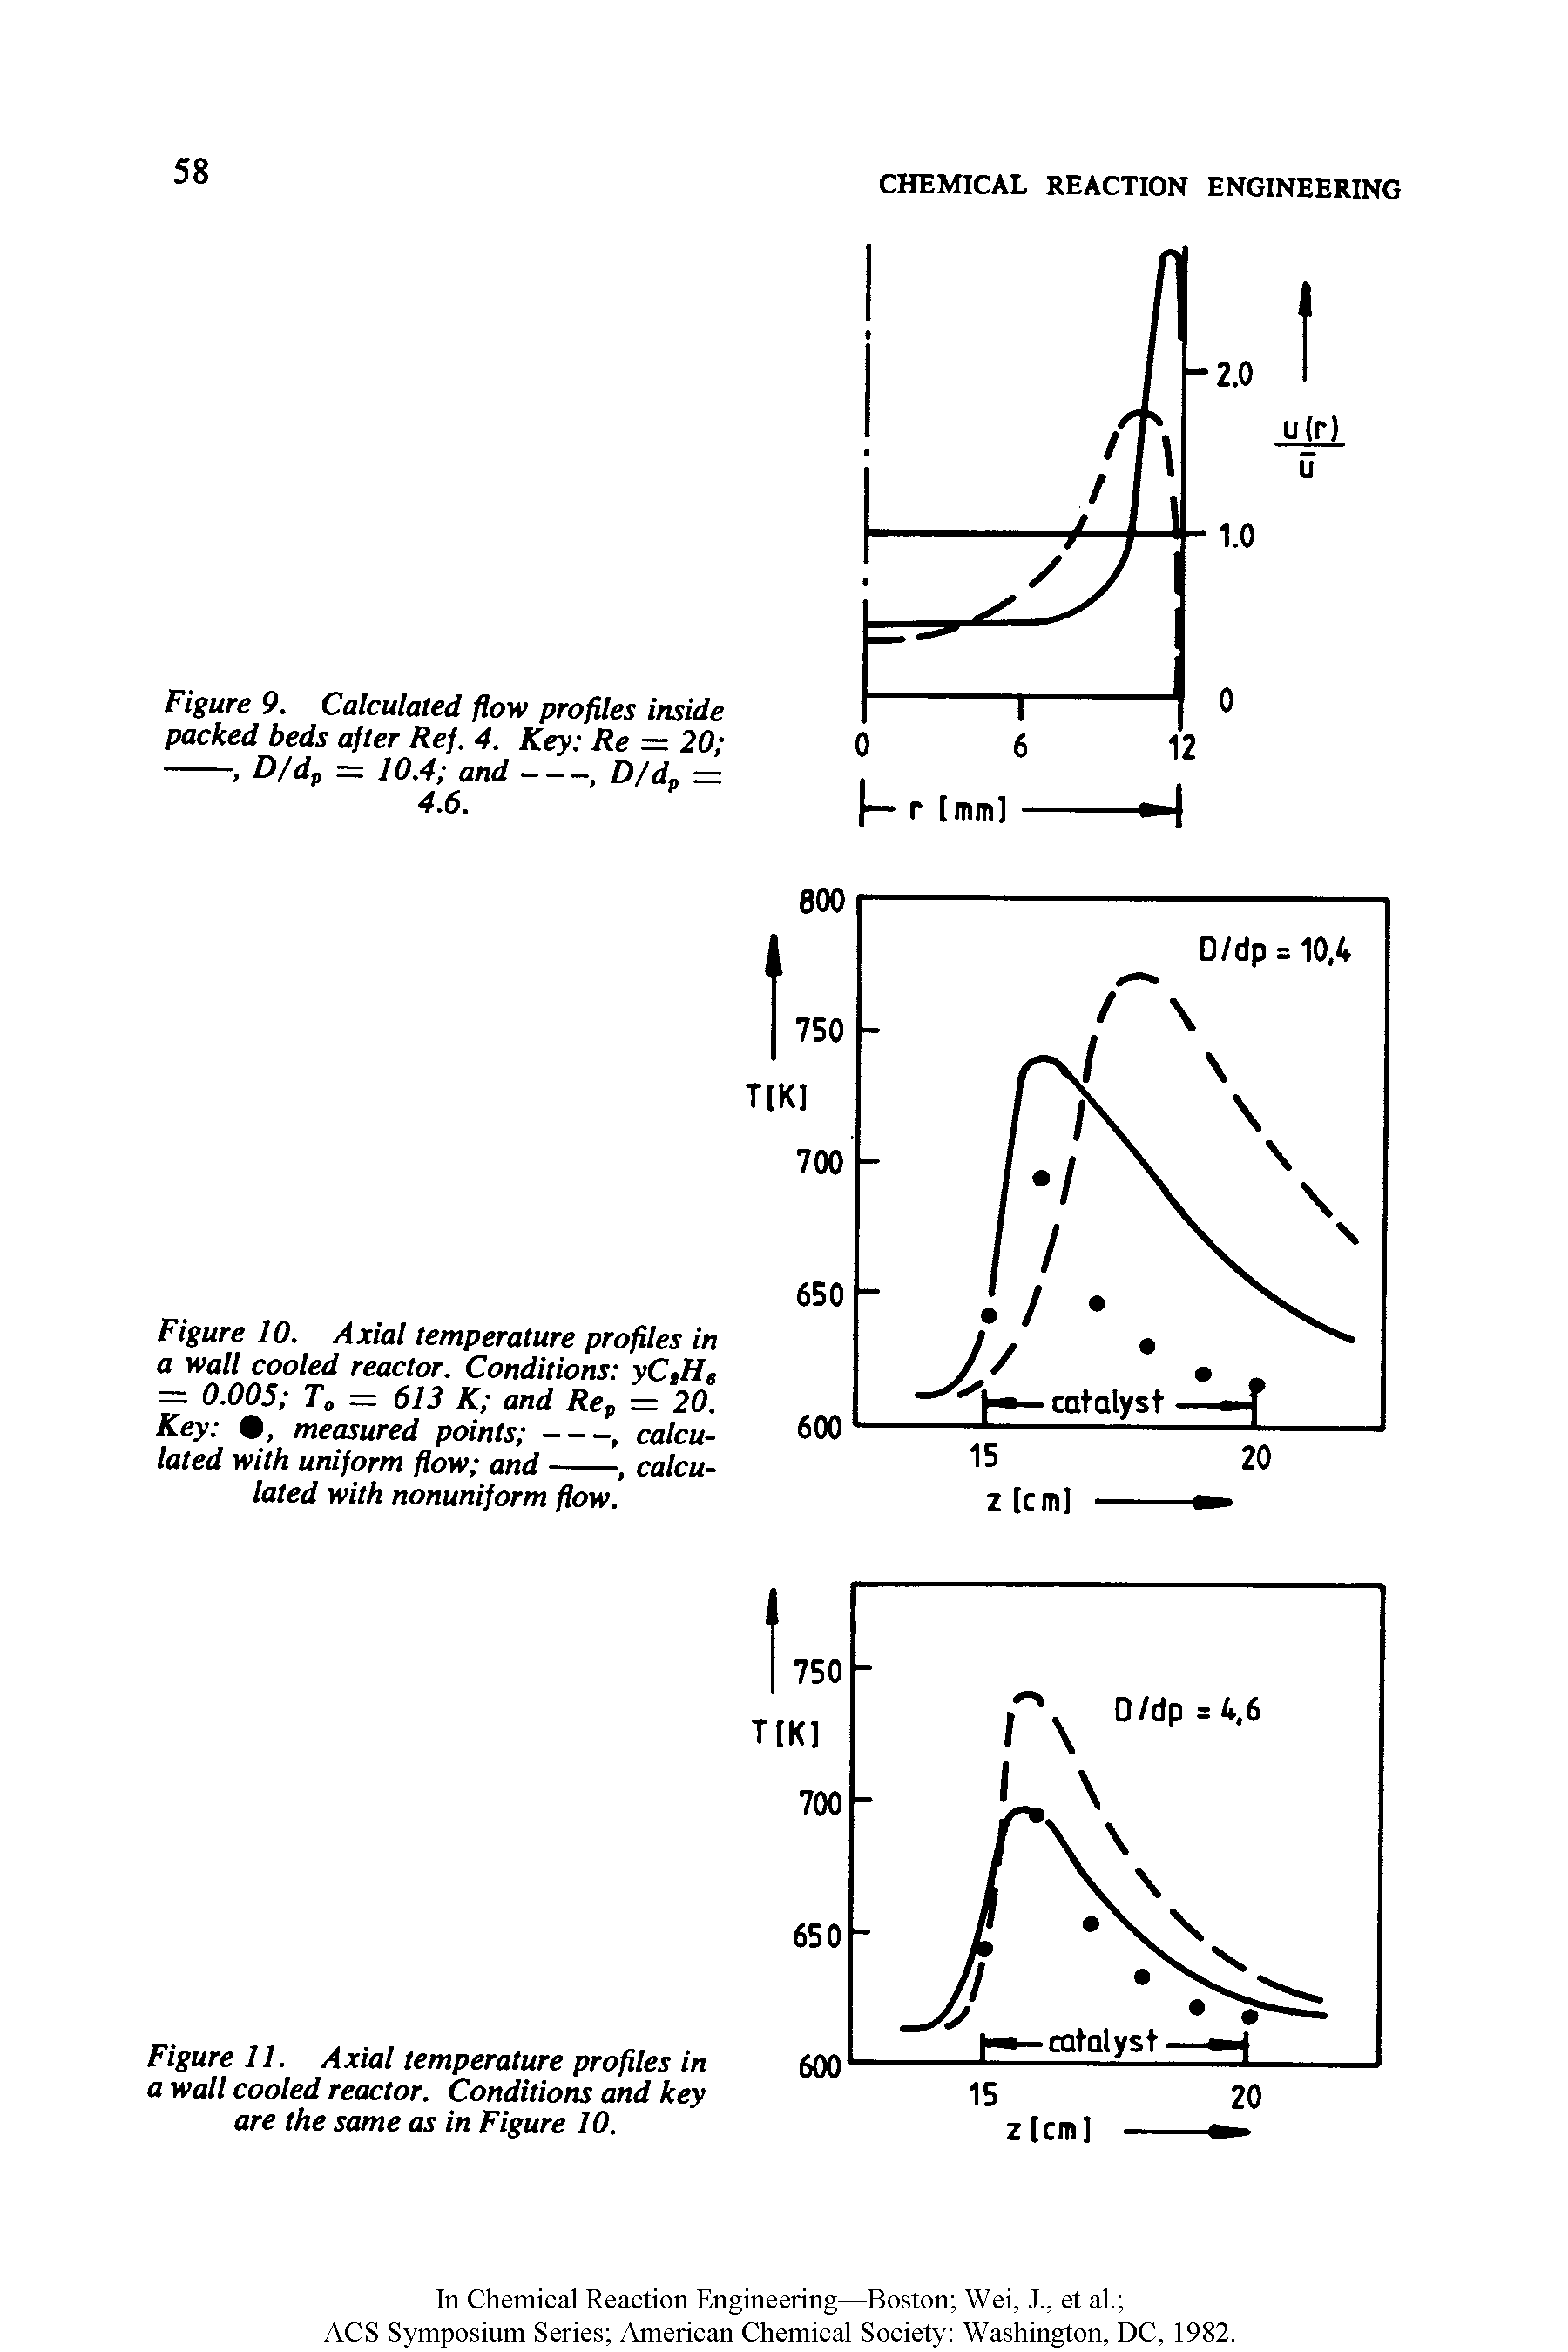 Figure 11. Axial temperature profiles in a wall cooled reactor. Conditions and key are the same as in Figure 10.